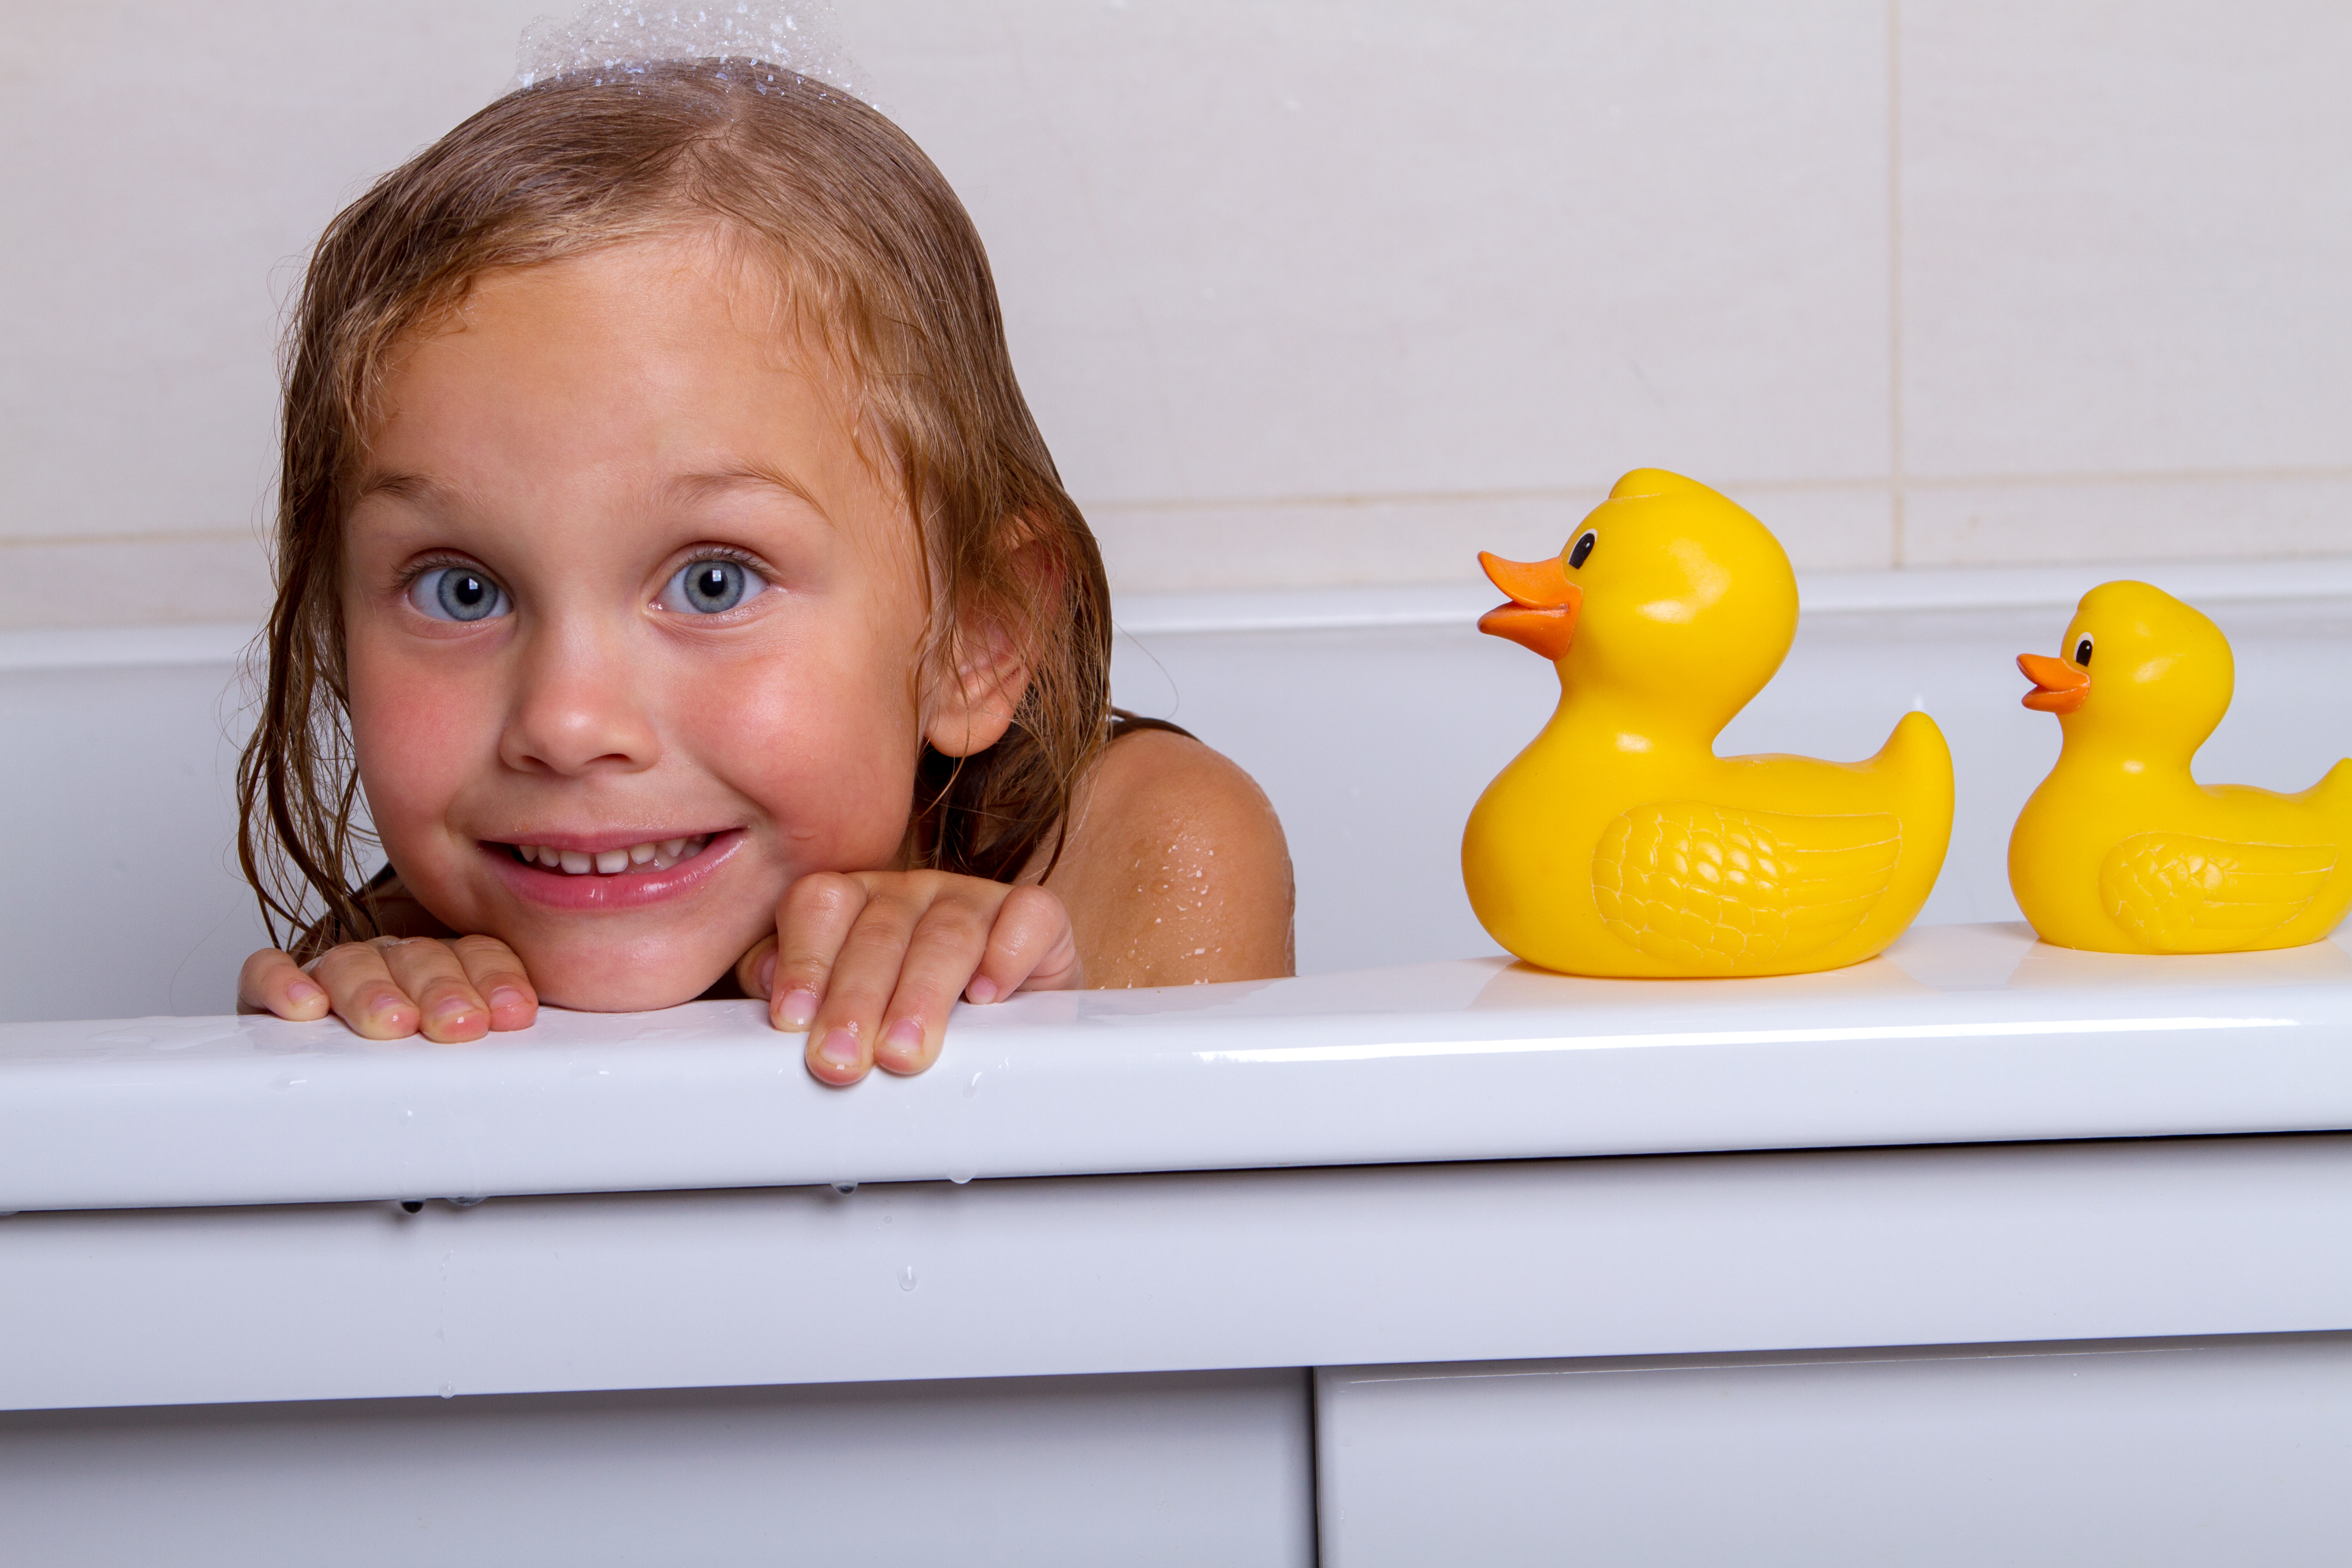 bath time fun with smiling little girl in tub with three yellow rubber ducks